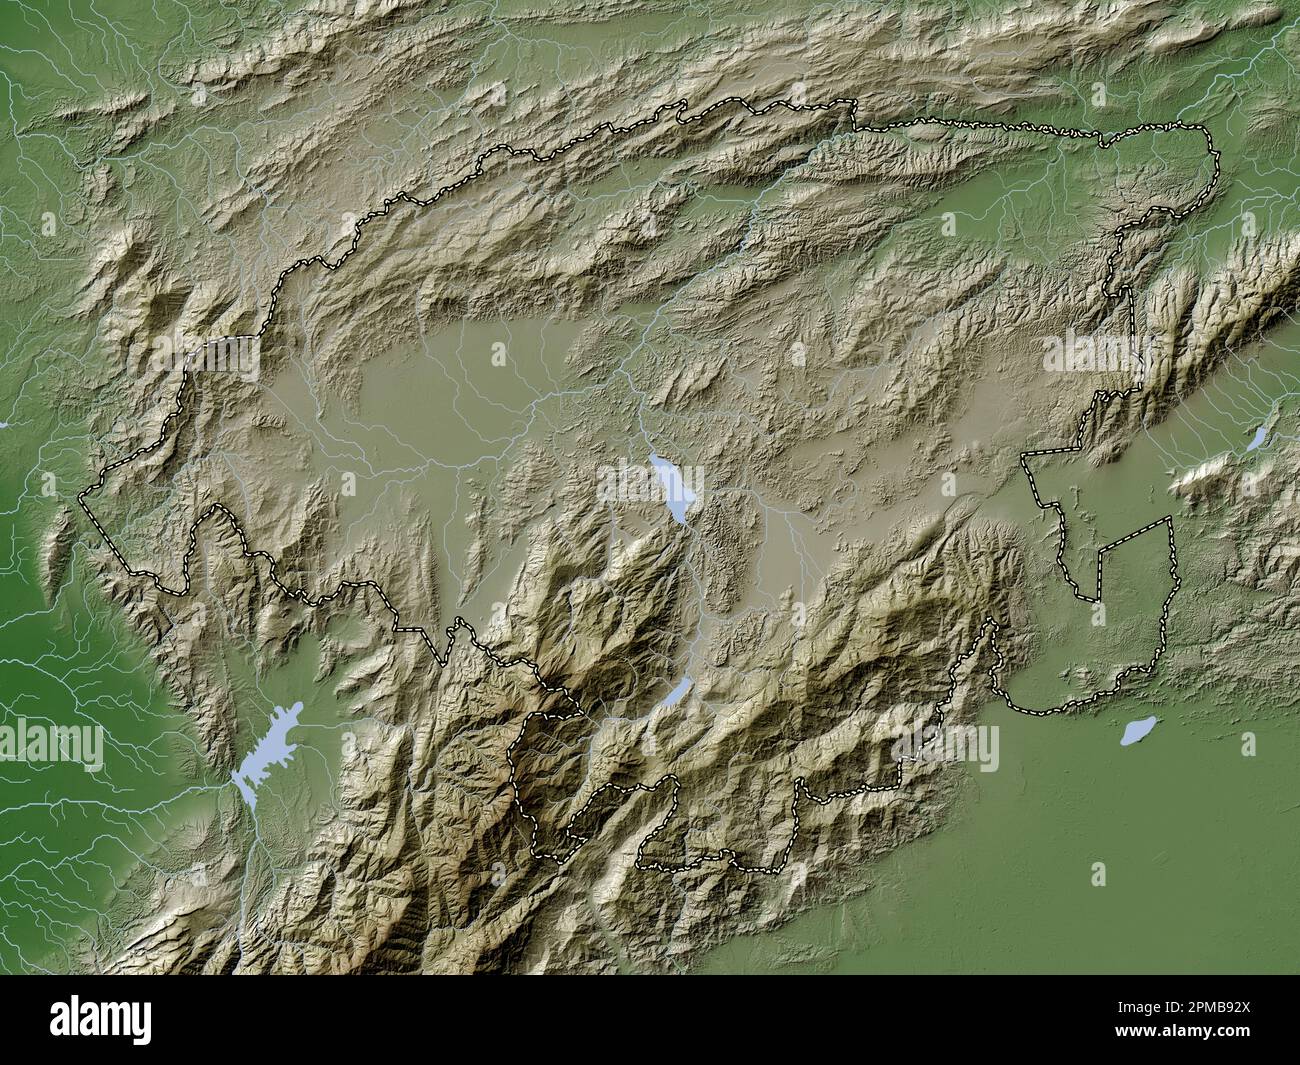 Lara, state of Venezuela. Elevation map colored in wiki style with lakes and rivers Stock Photo